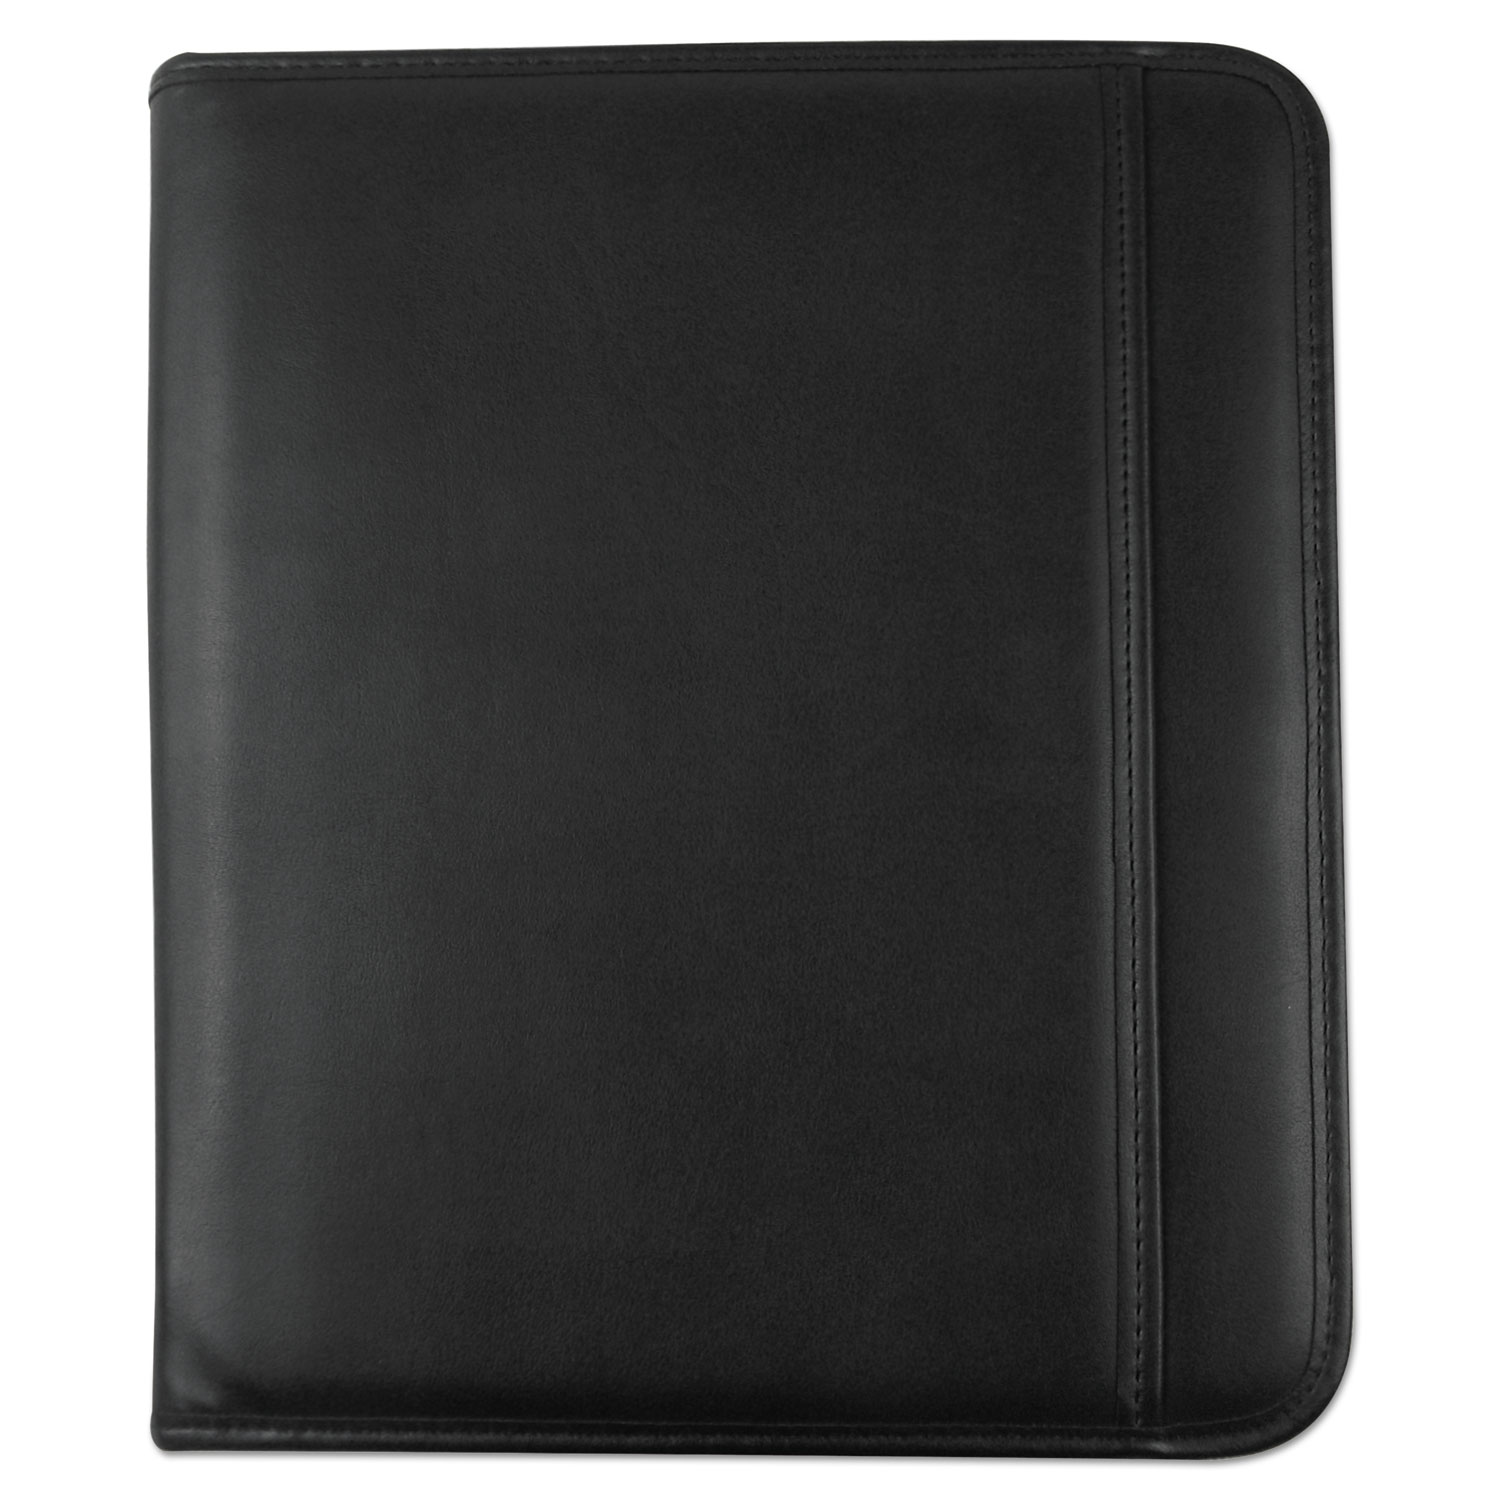 Leather Textured Zippered PadFolio with Tablet Pocket, 10 3/4 x 13 1/8, Black